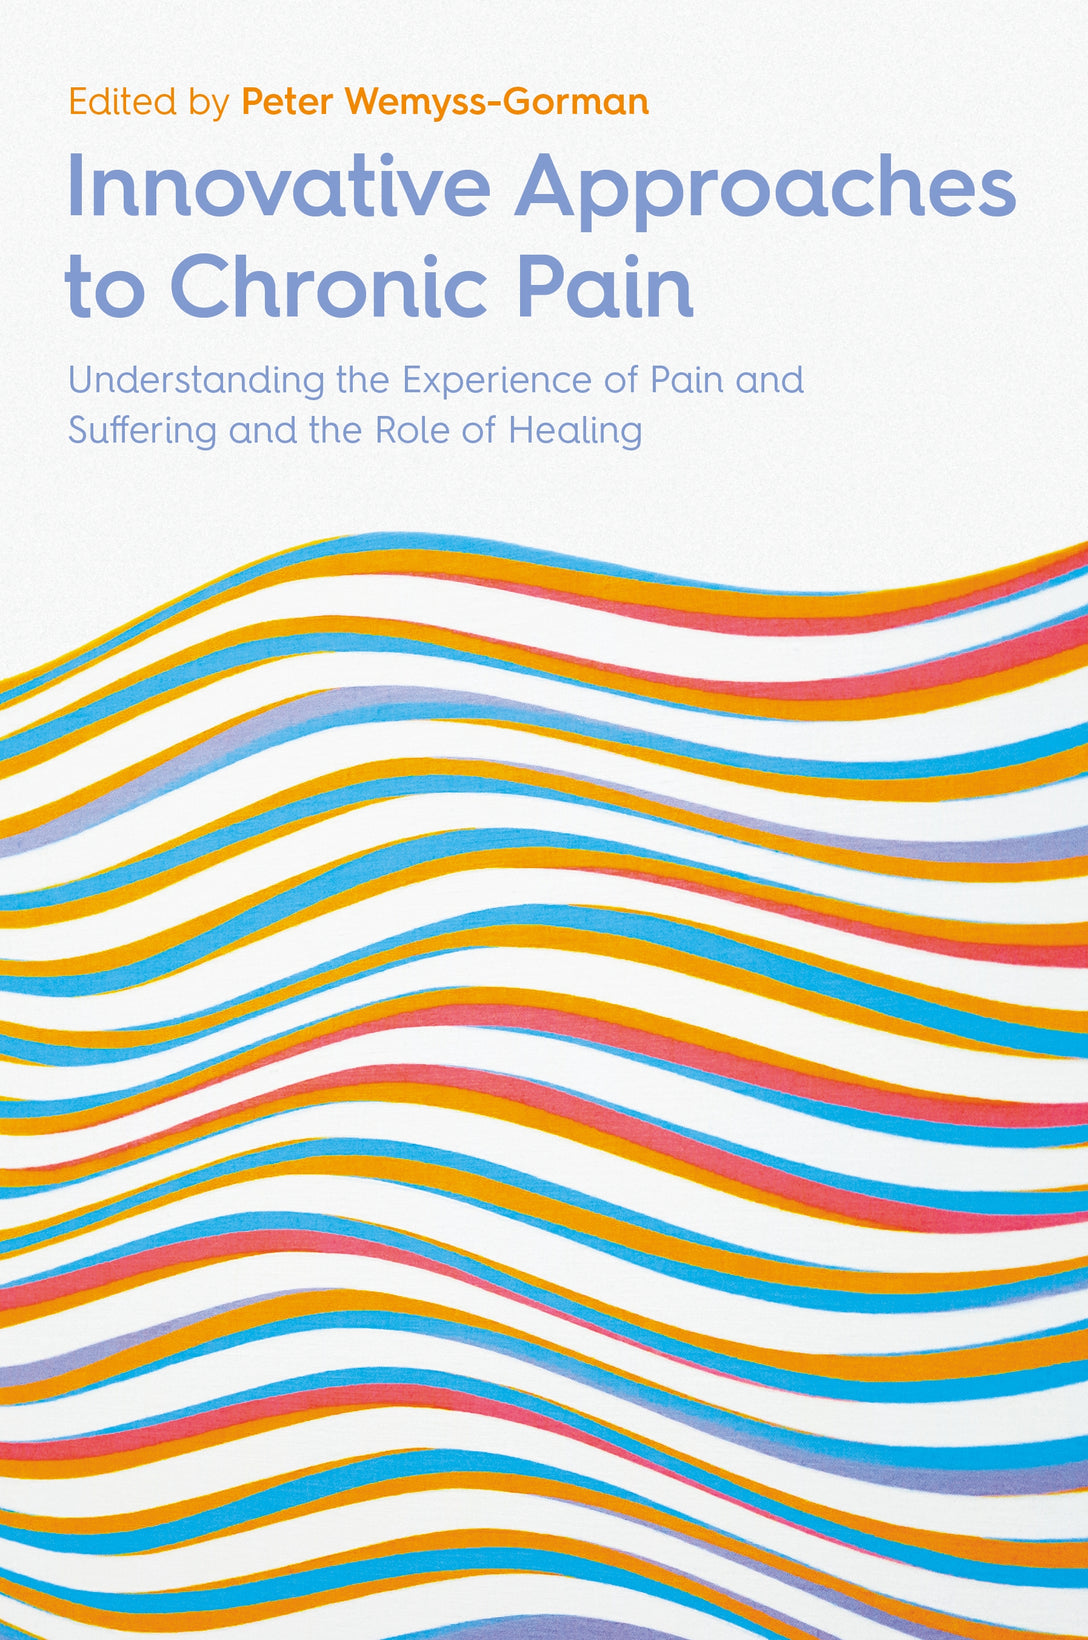 Innovative Approaches to Chronic Pain by No Author Listed, Peter Wemyss-Gorman